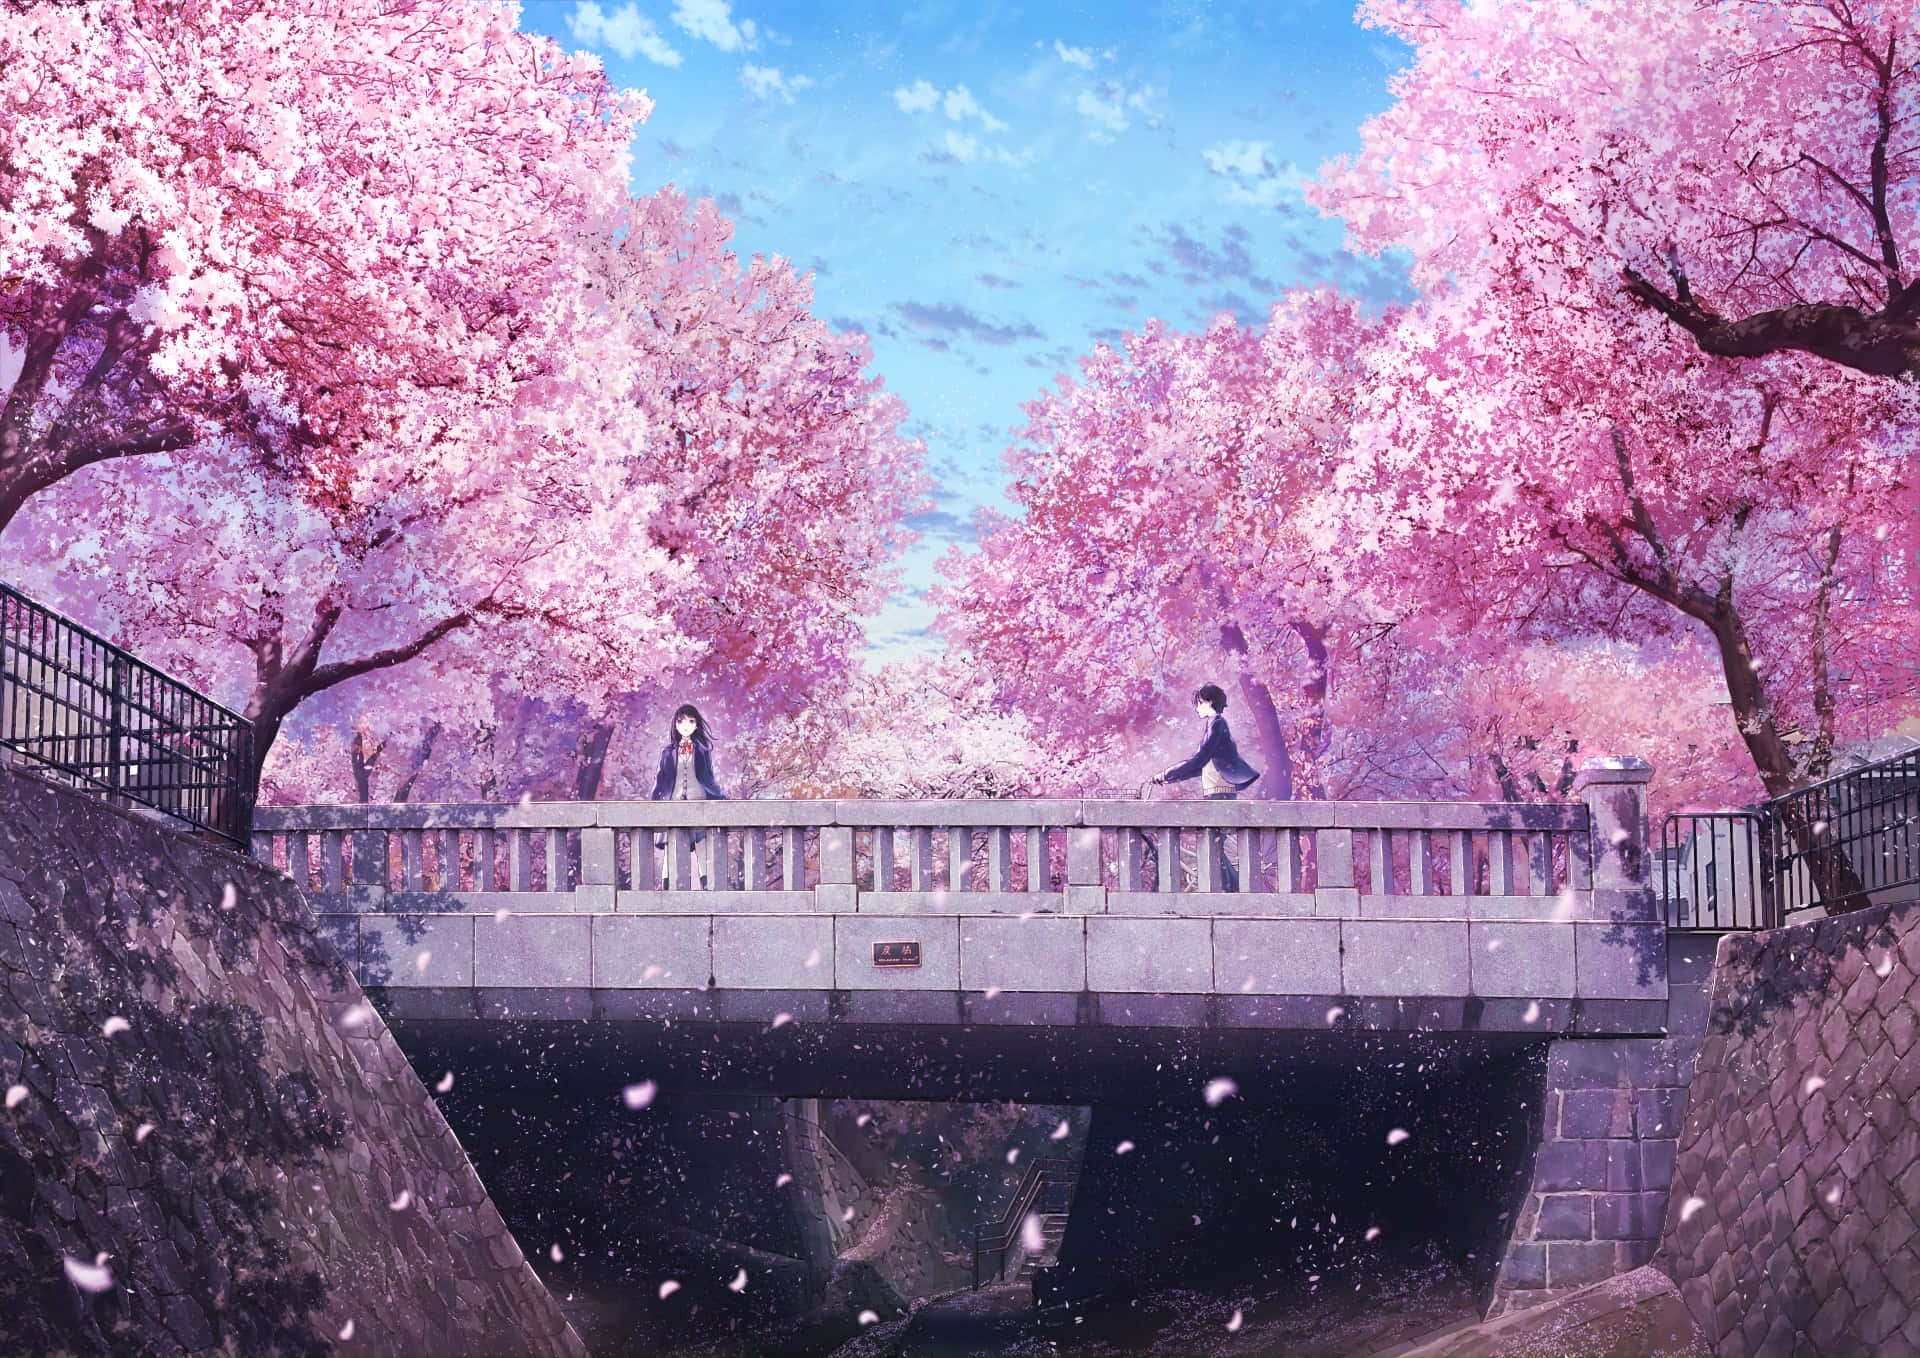 A Painting Of A Bridge With Pink Blossoms